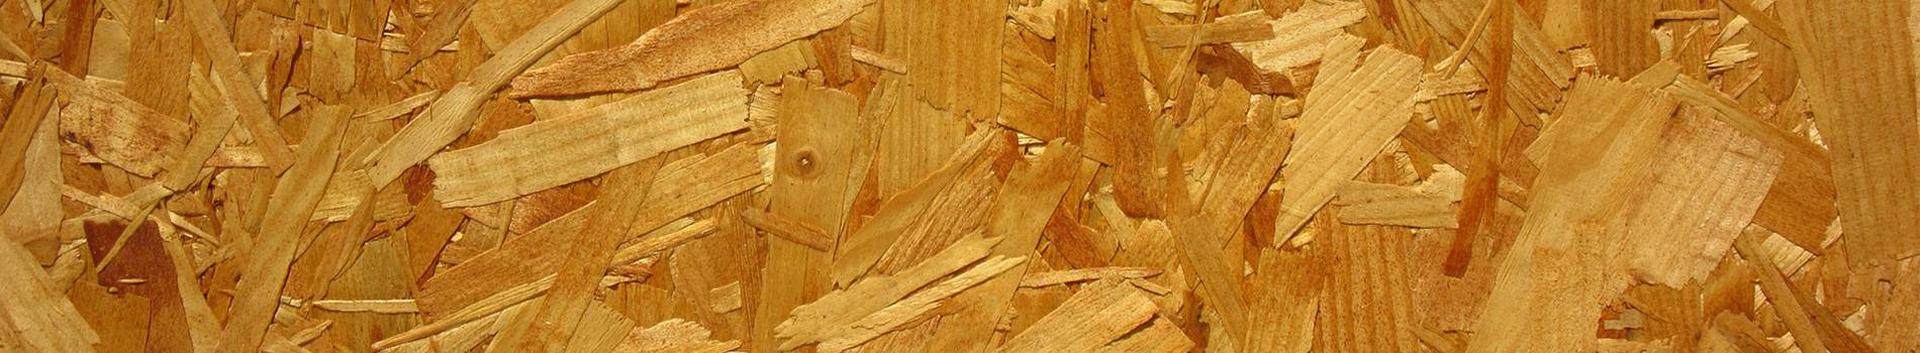 construction and finishing materials, woodware products, construction and real estate